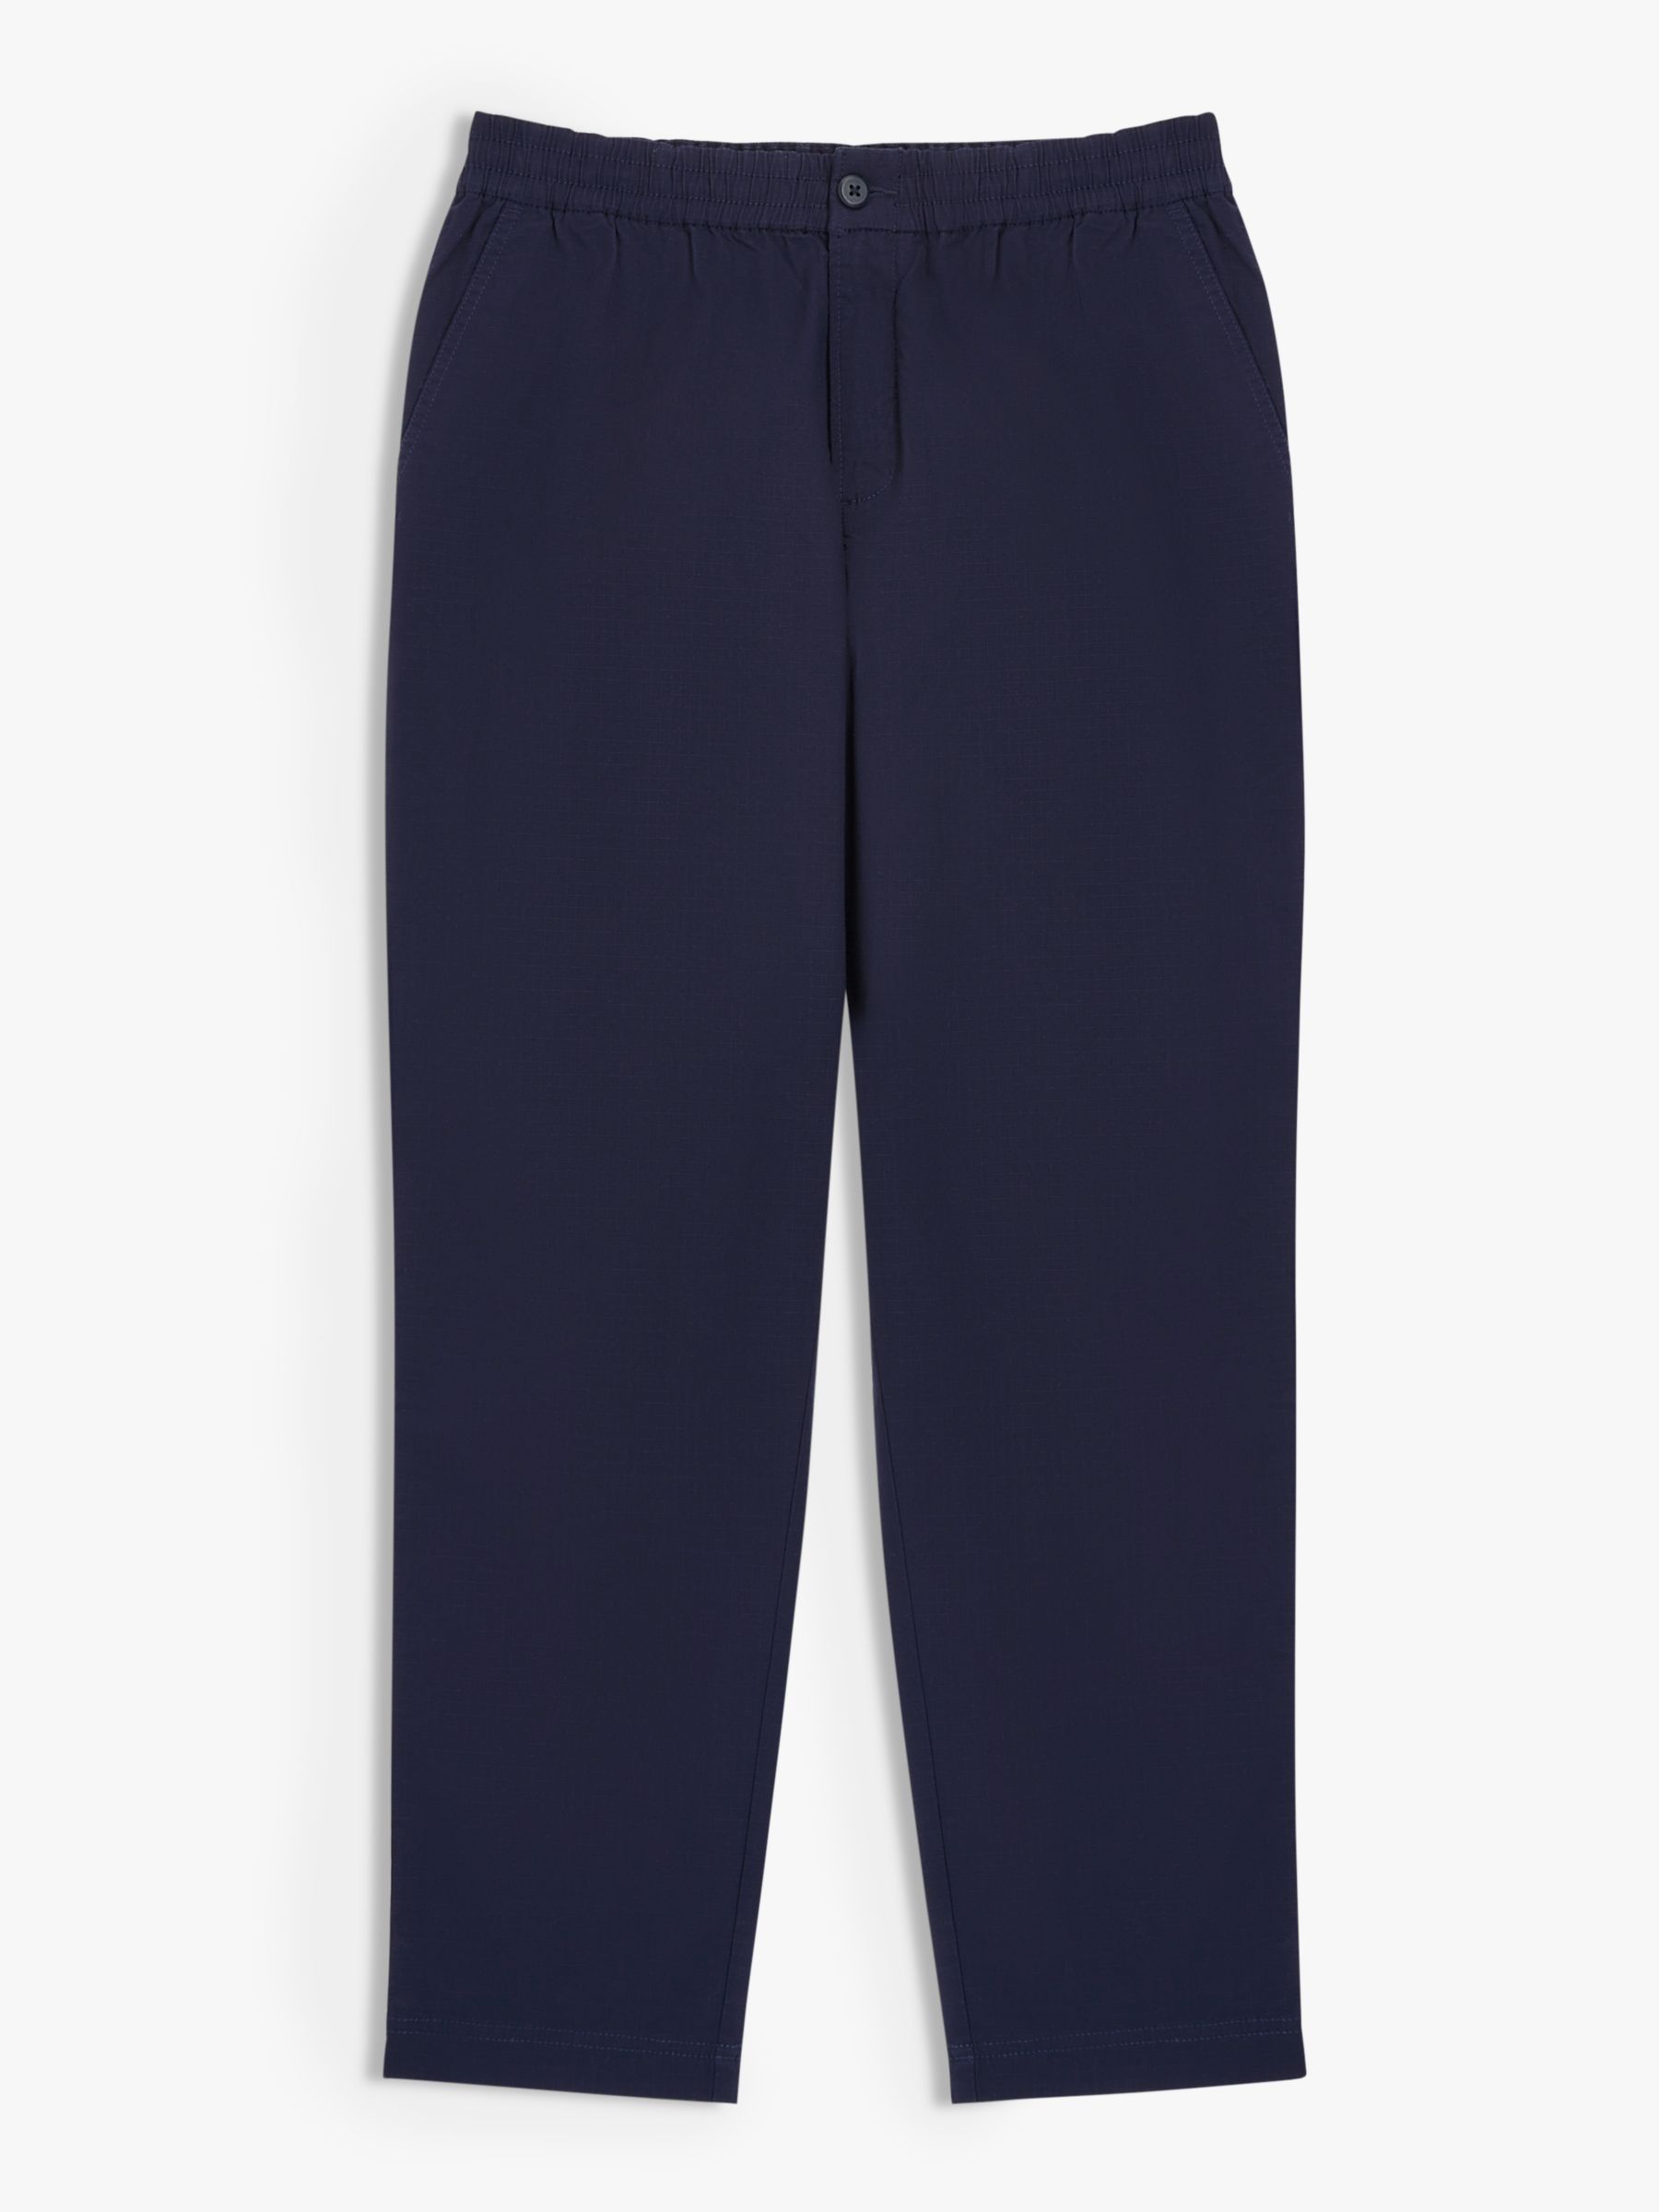 John Lewis ANYDAY Relaxed Fit Ripstop Stretch Cotton Ankle Trousers, Navy, S